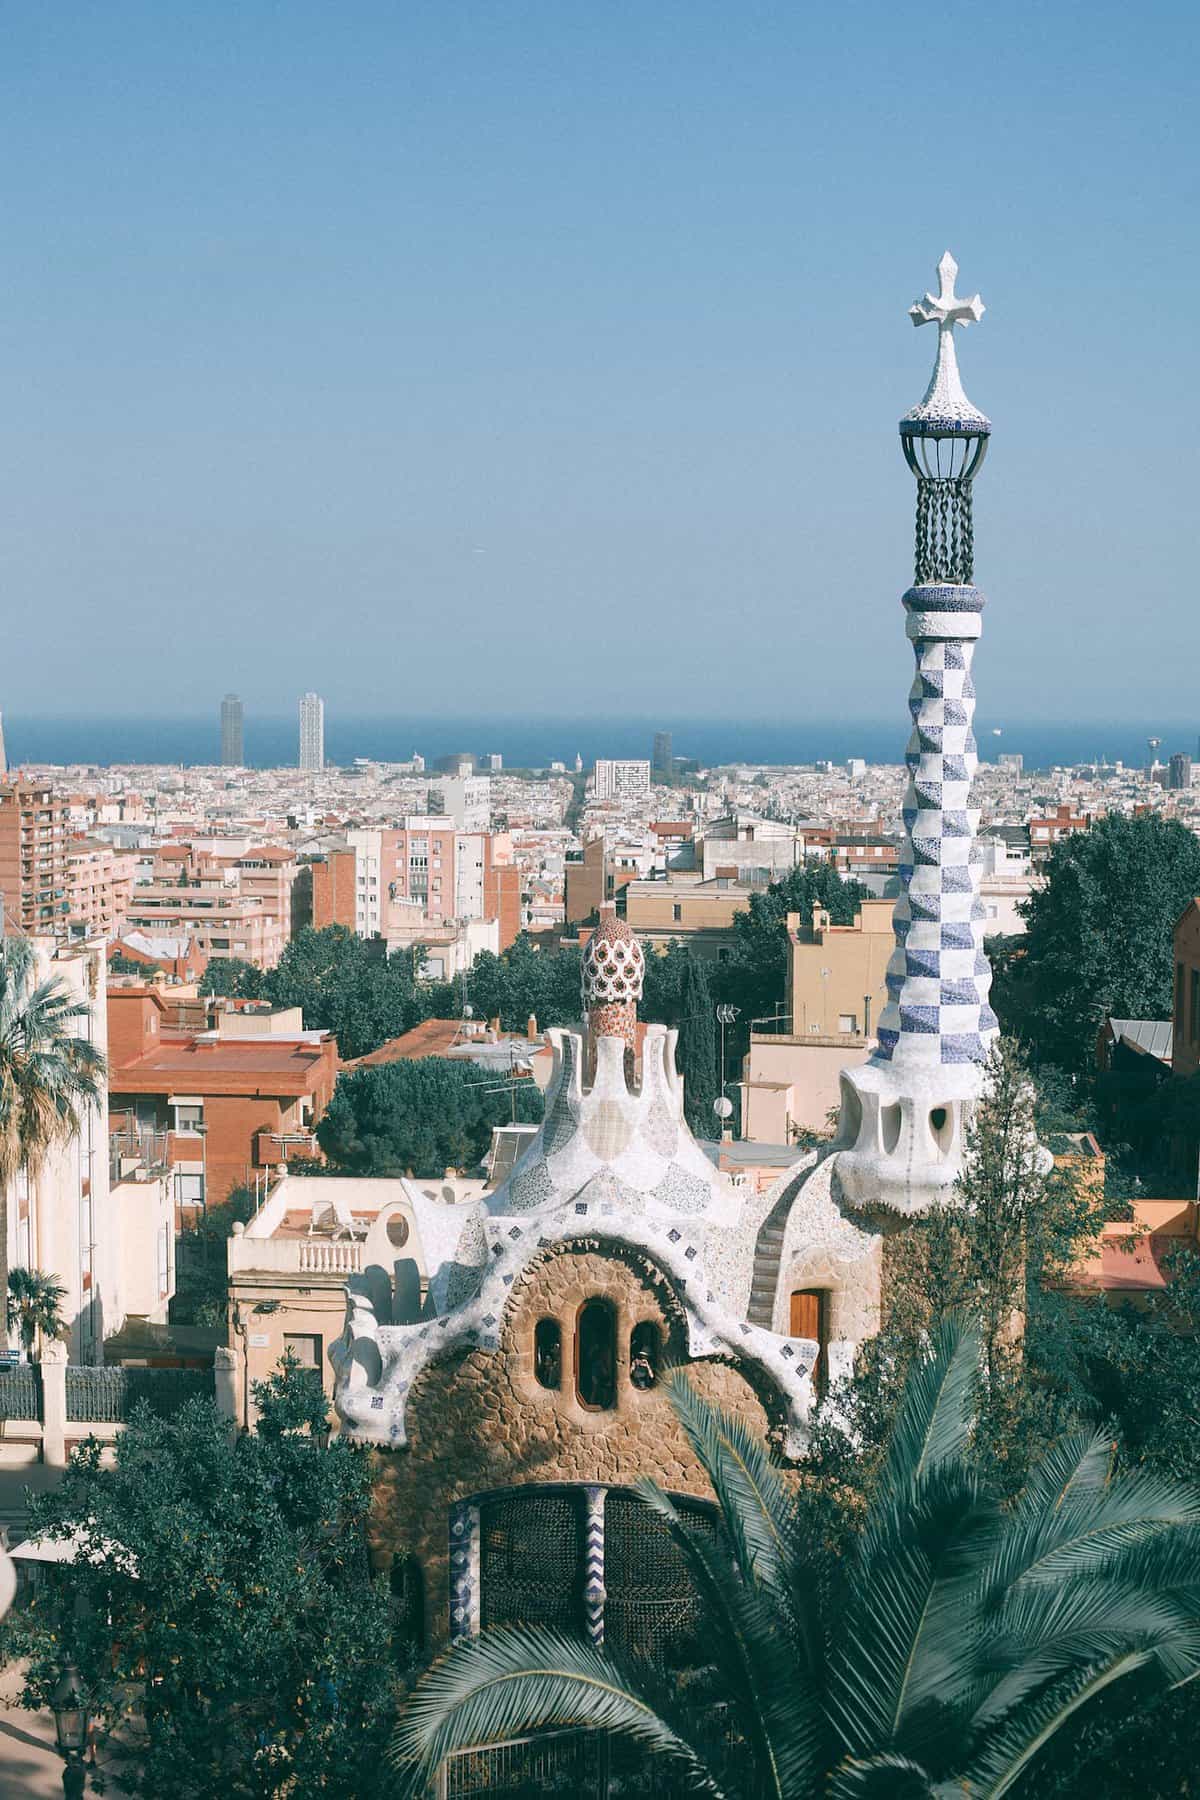 Where to stay in barcelona For first time Visitor